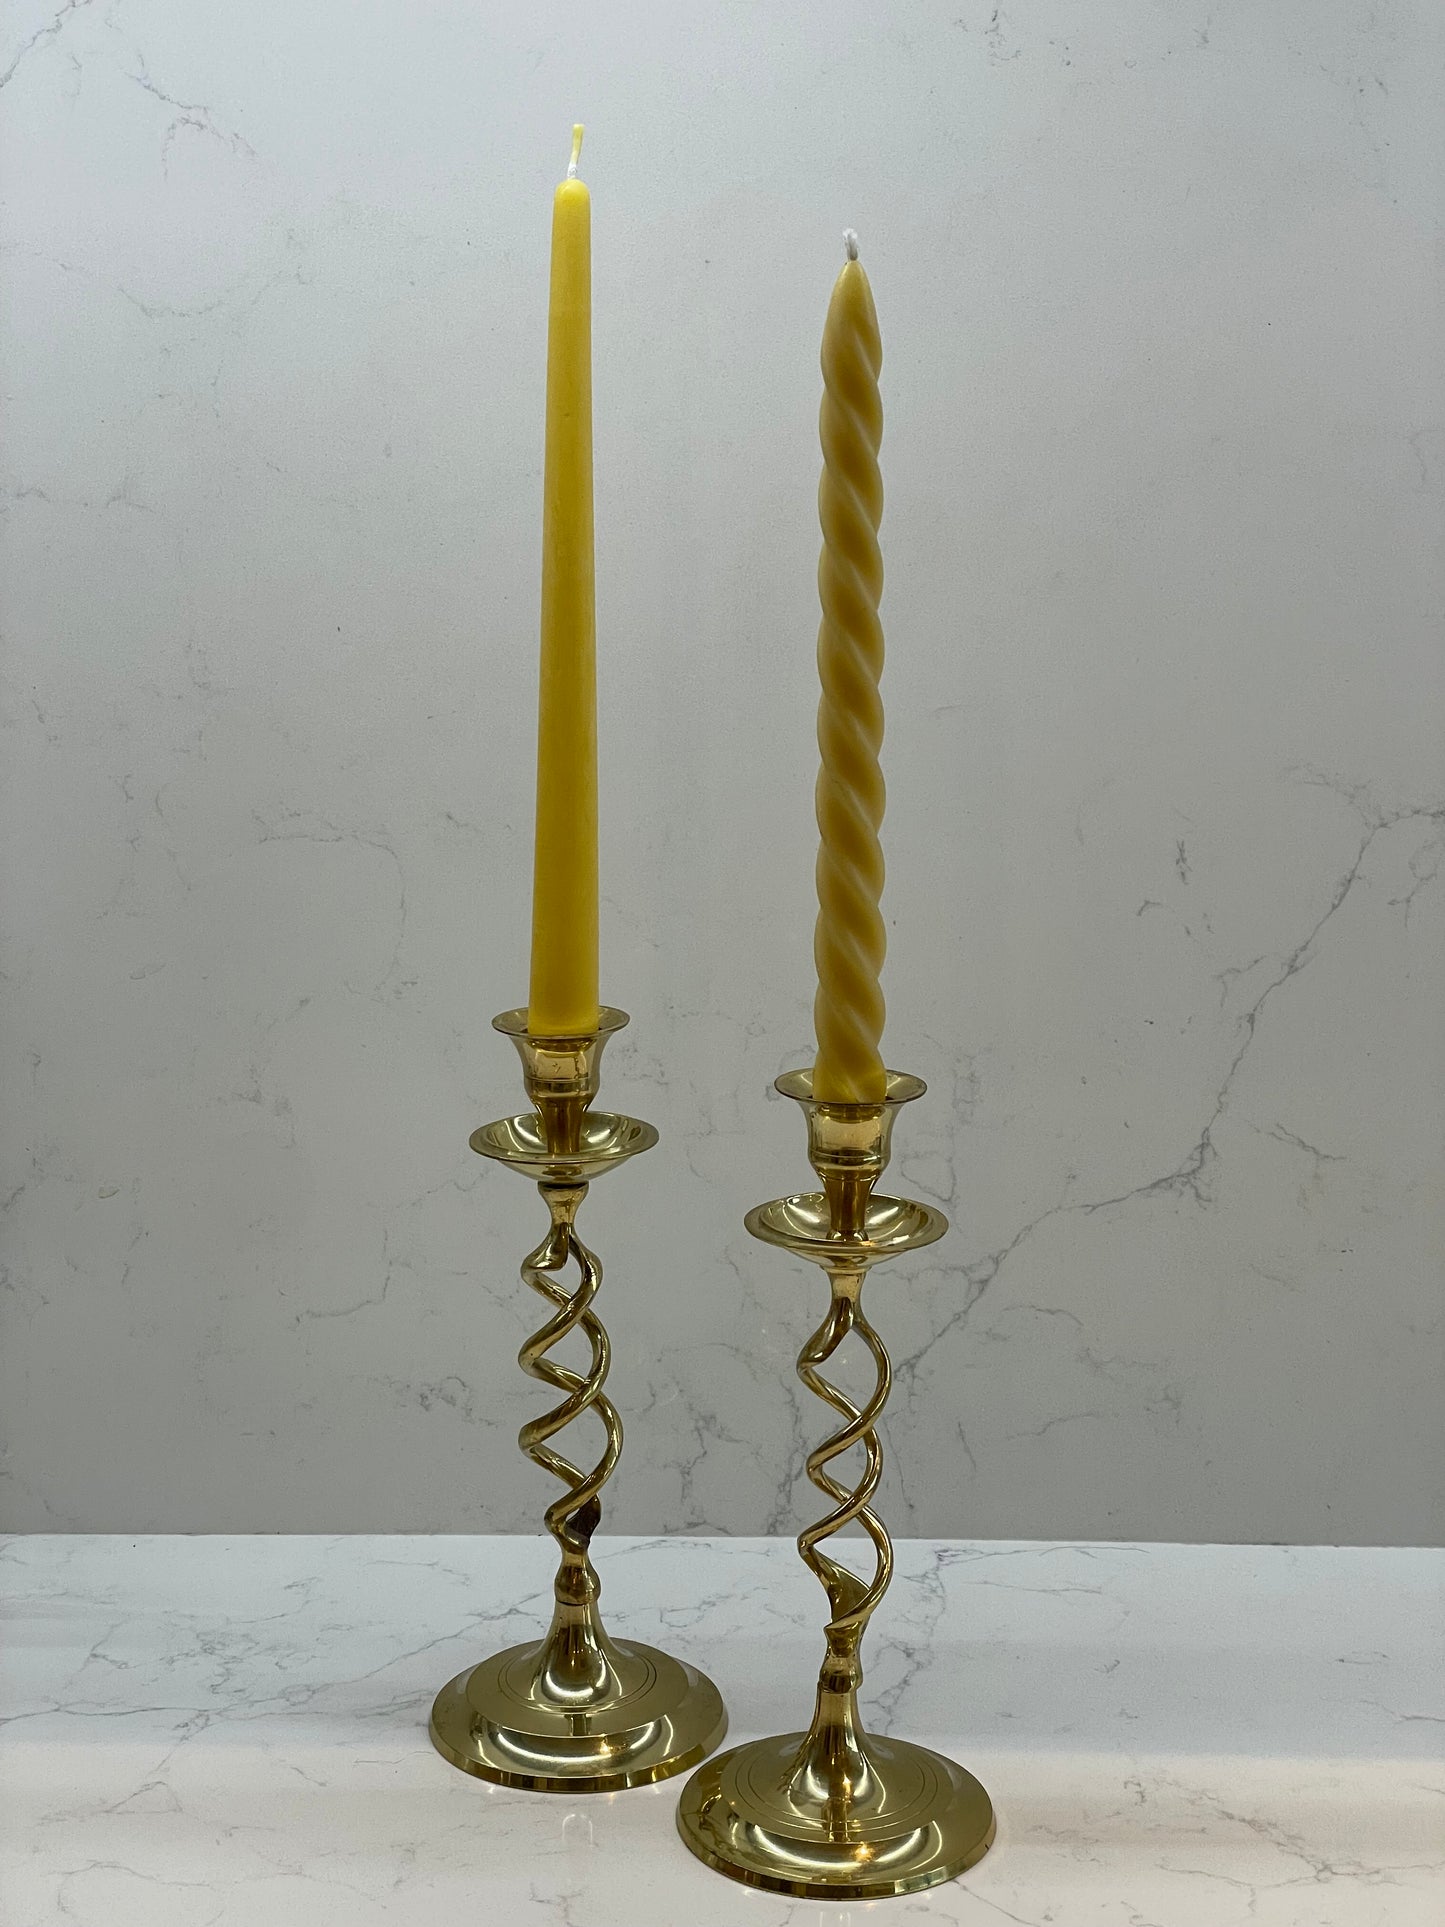 Charming barley twist candlesticks with 4 pure London beeswax dinner c –  The London Beeswax Candle Company